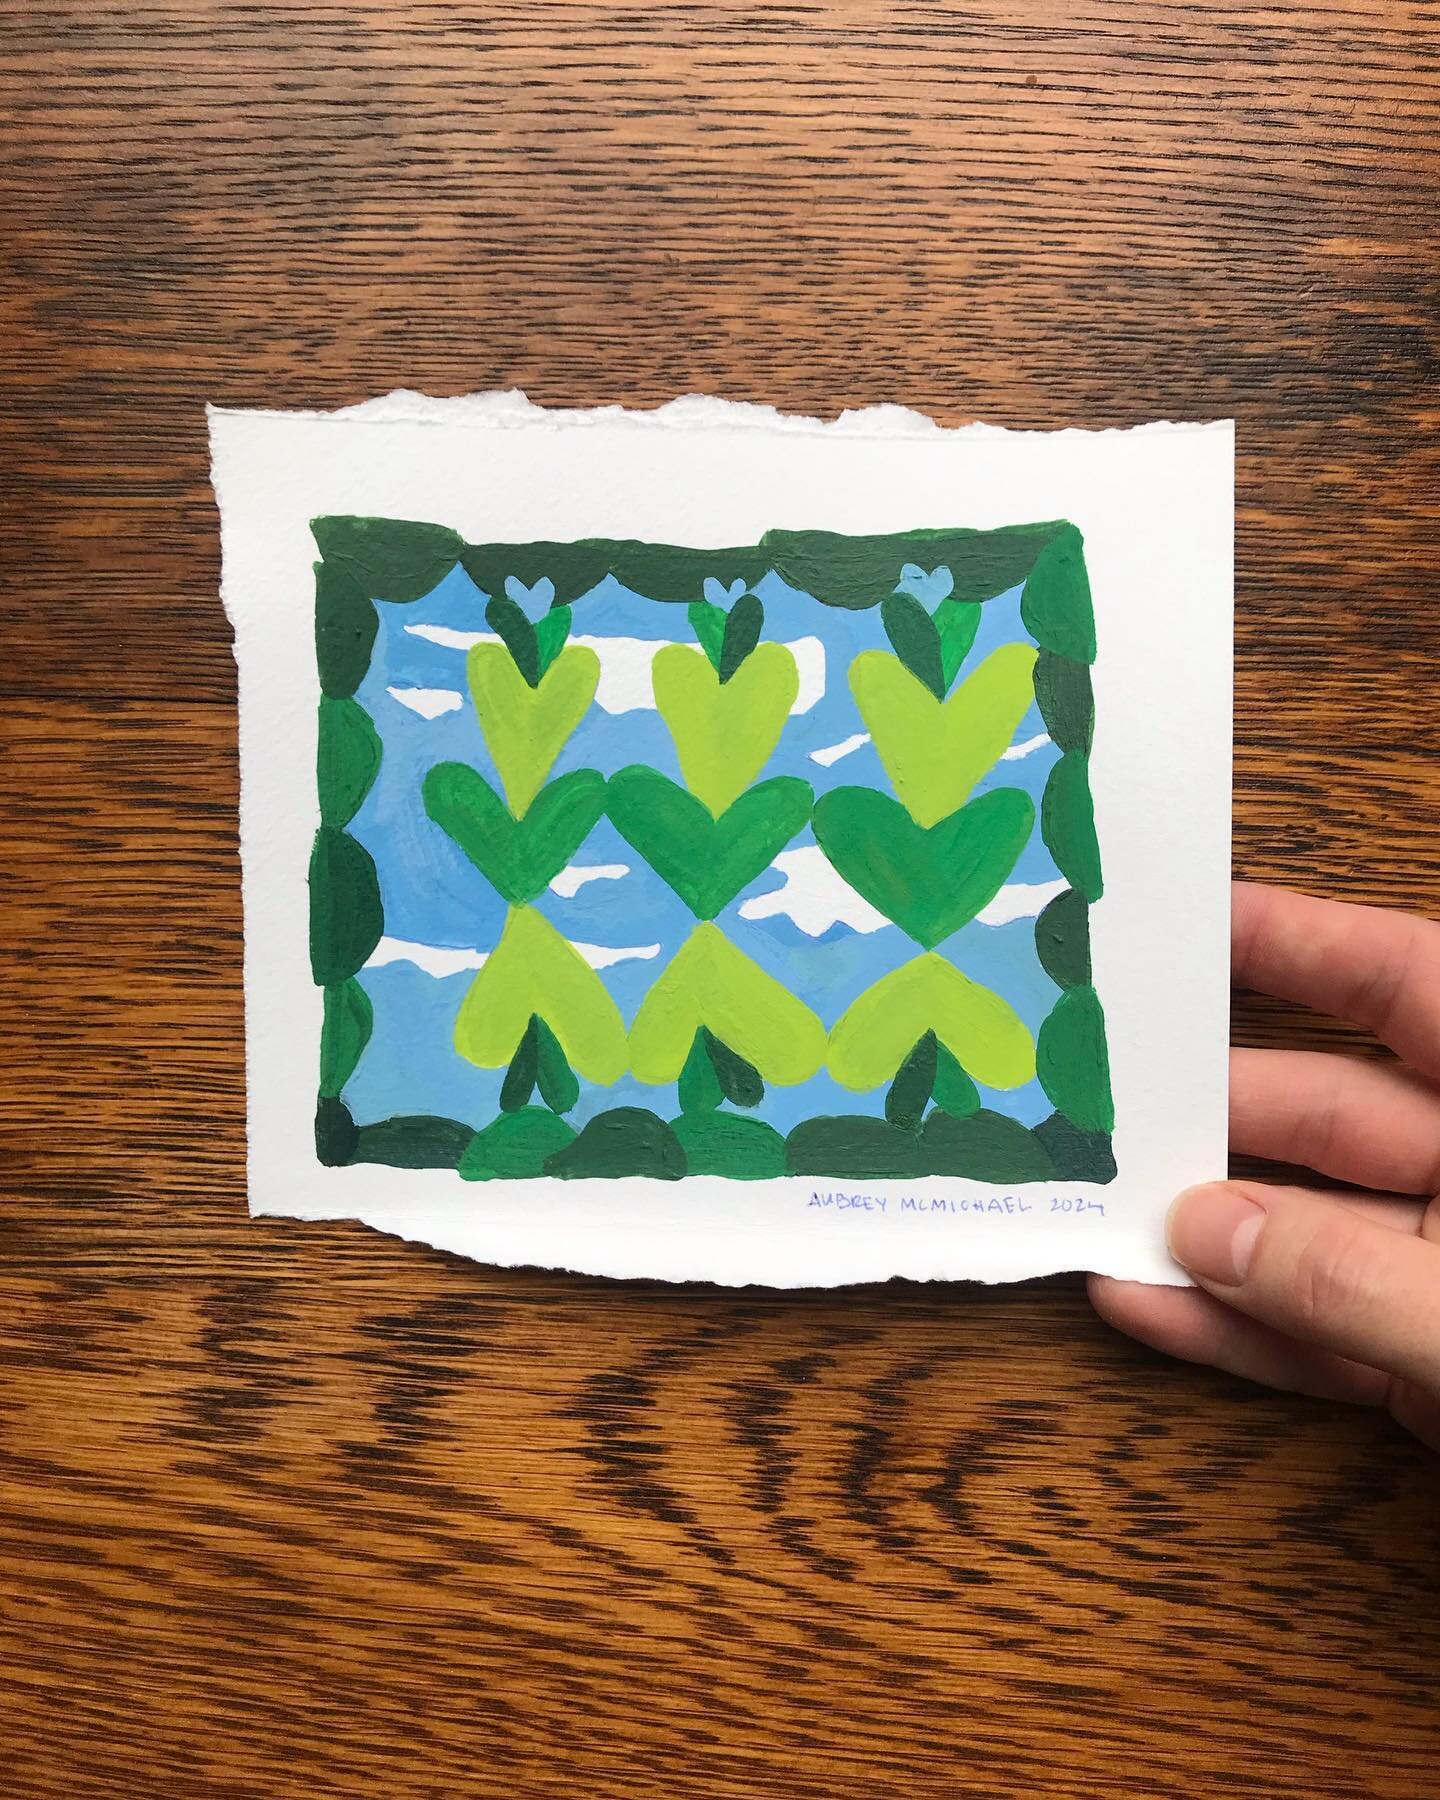 Looking through heart patterns to see the clouds ✨💙💚☁️☀️ Mini painting made with acrylic on paper. Approx 4x6&rdquo;.

#smallartist #cloudpaintings #heartpaintings #acrylicpaintings #seattleartists #aubreydraws #smallpainting #colorfulartwork #make